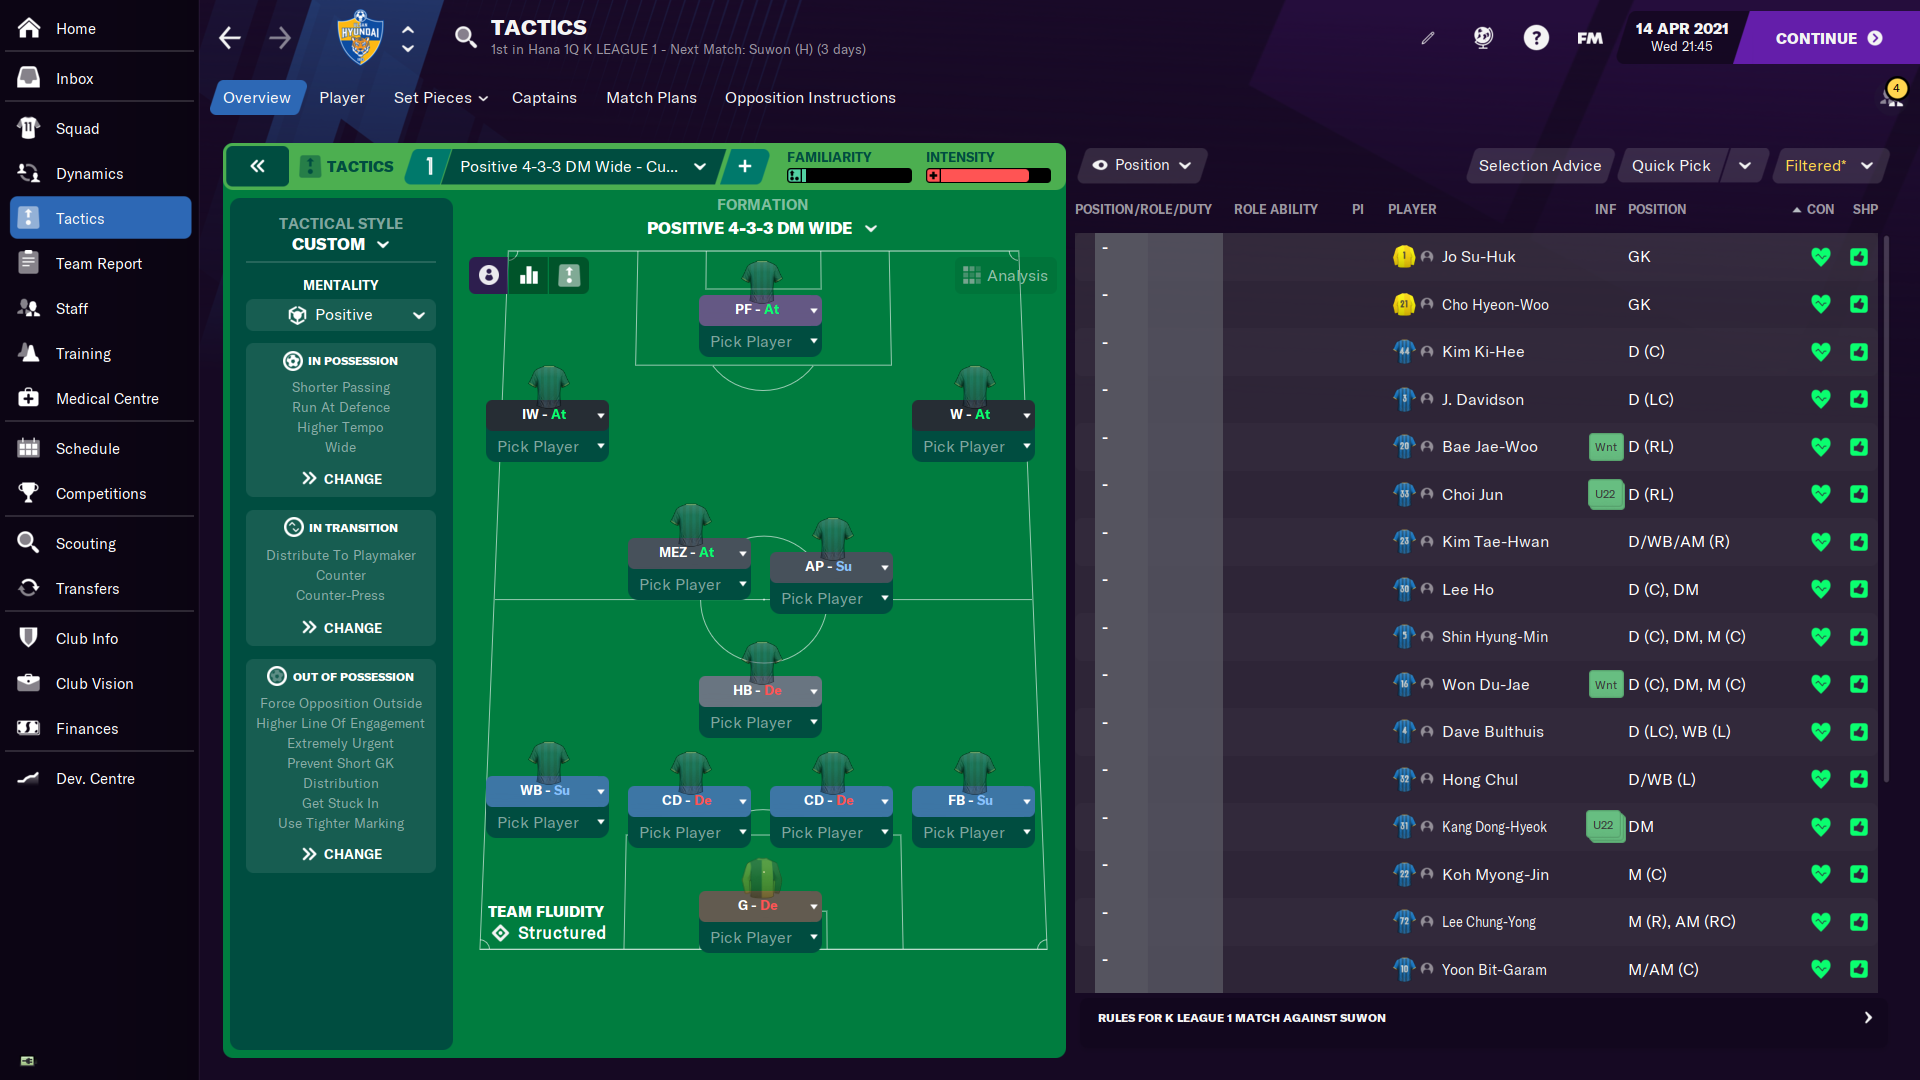 Crafting an effective midfield in FM21 | Football Manager 2021